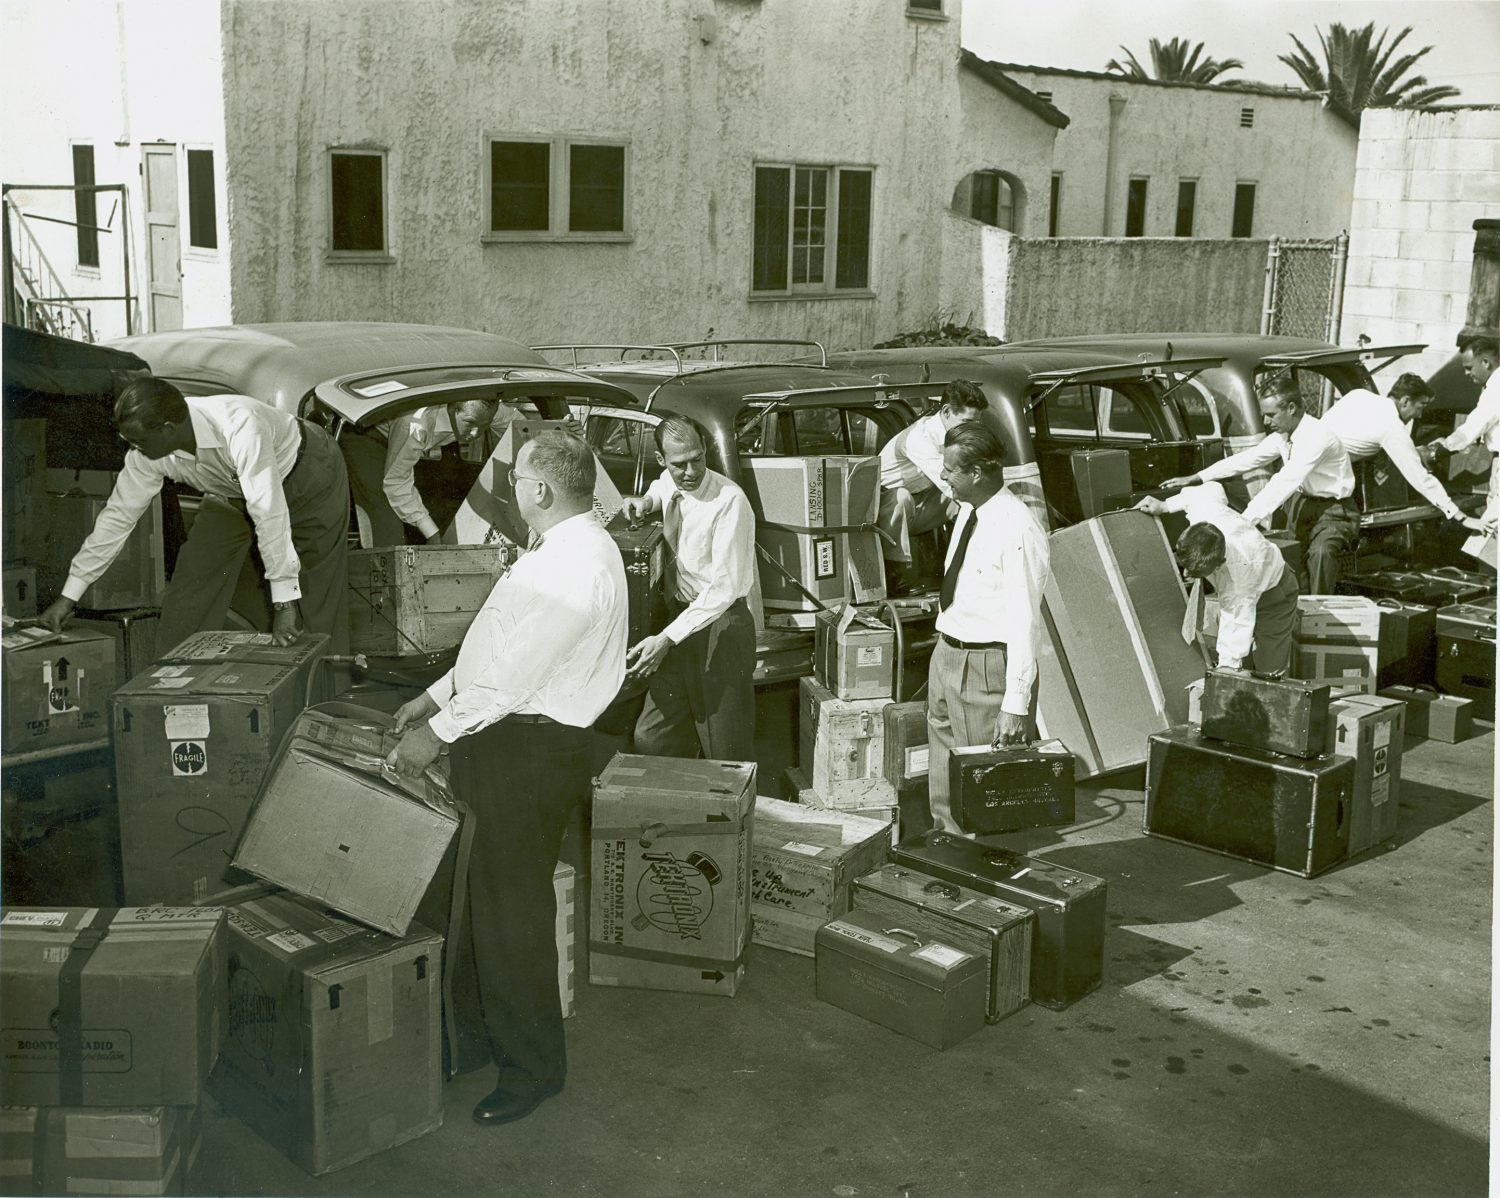 Salesmen placing Hewlett-Packard equipment in vehicles to prepare for road shows in 1952.